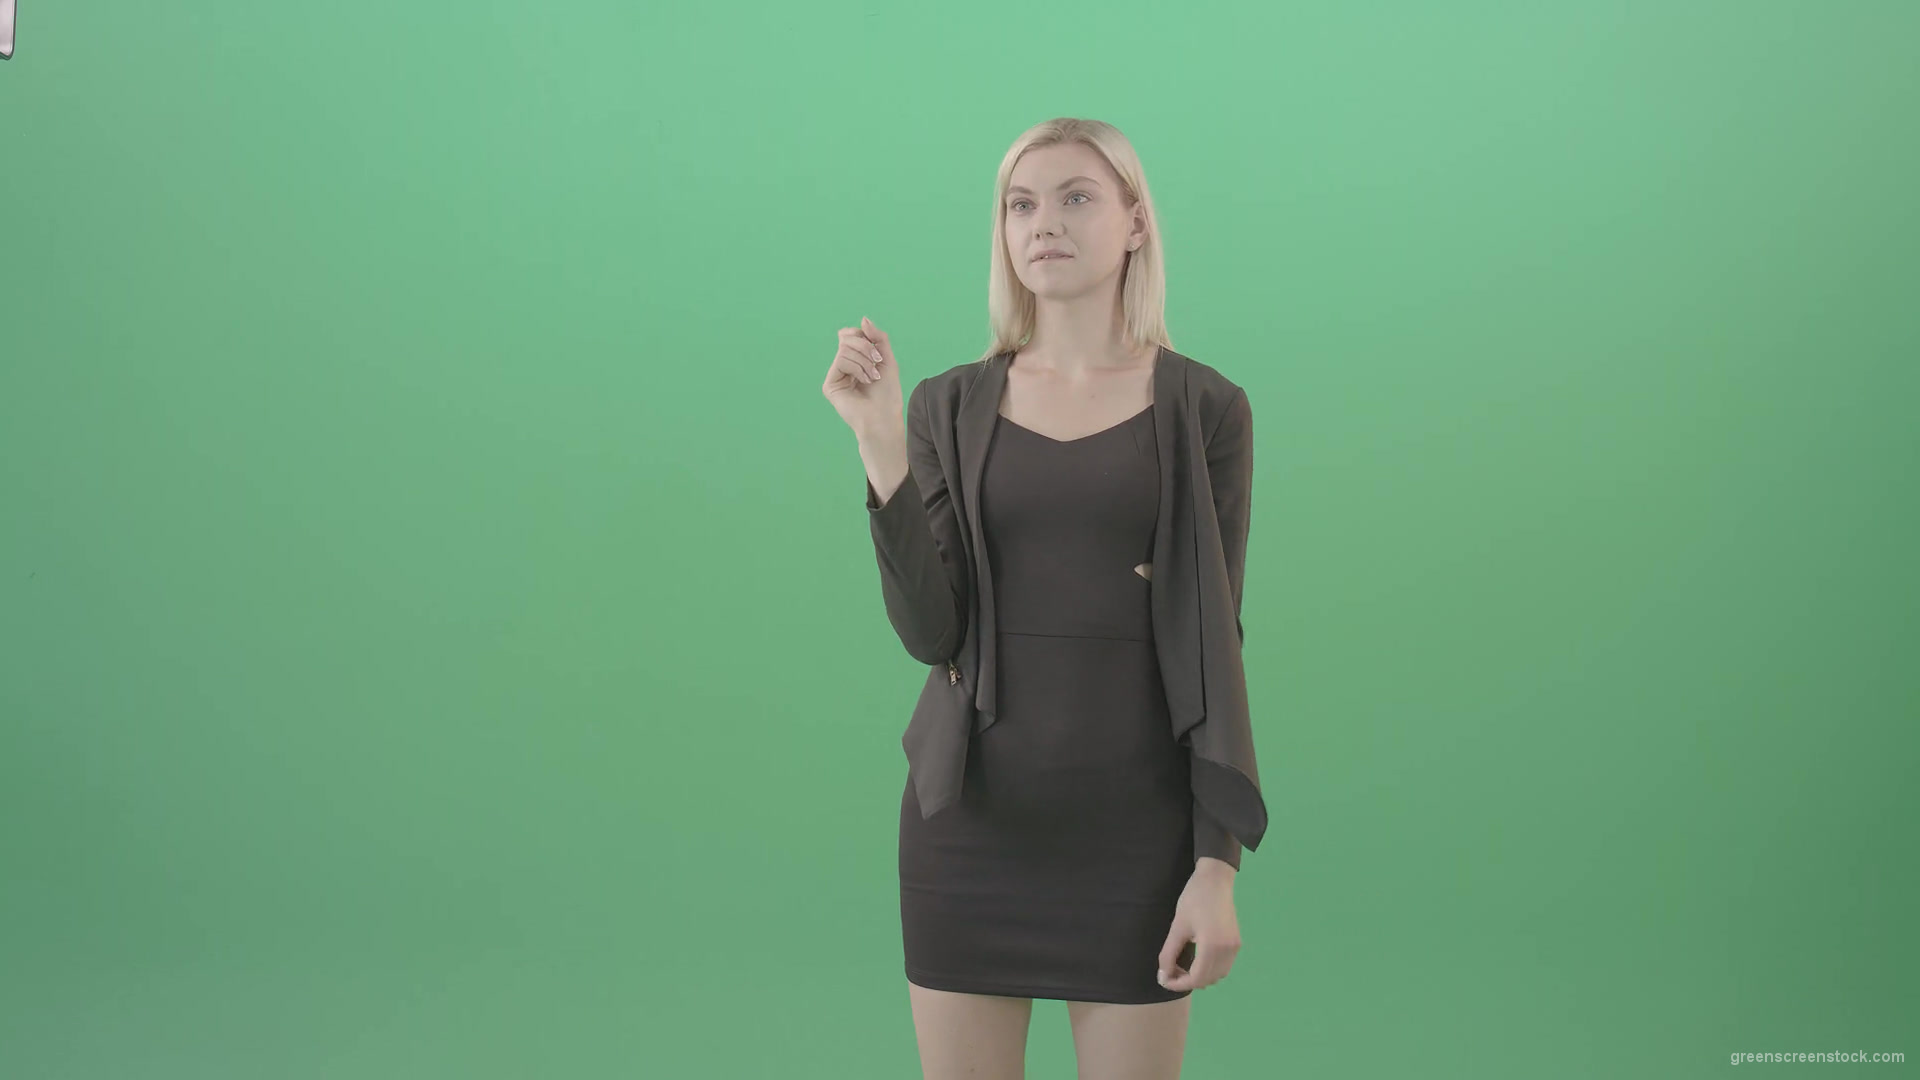 Blondie-shopping-in-virtual-store-on-touch-screen-in-green-screen-studio-4K-Video-Footage-1920_005 Green Screen Stock